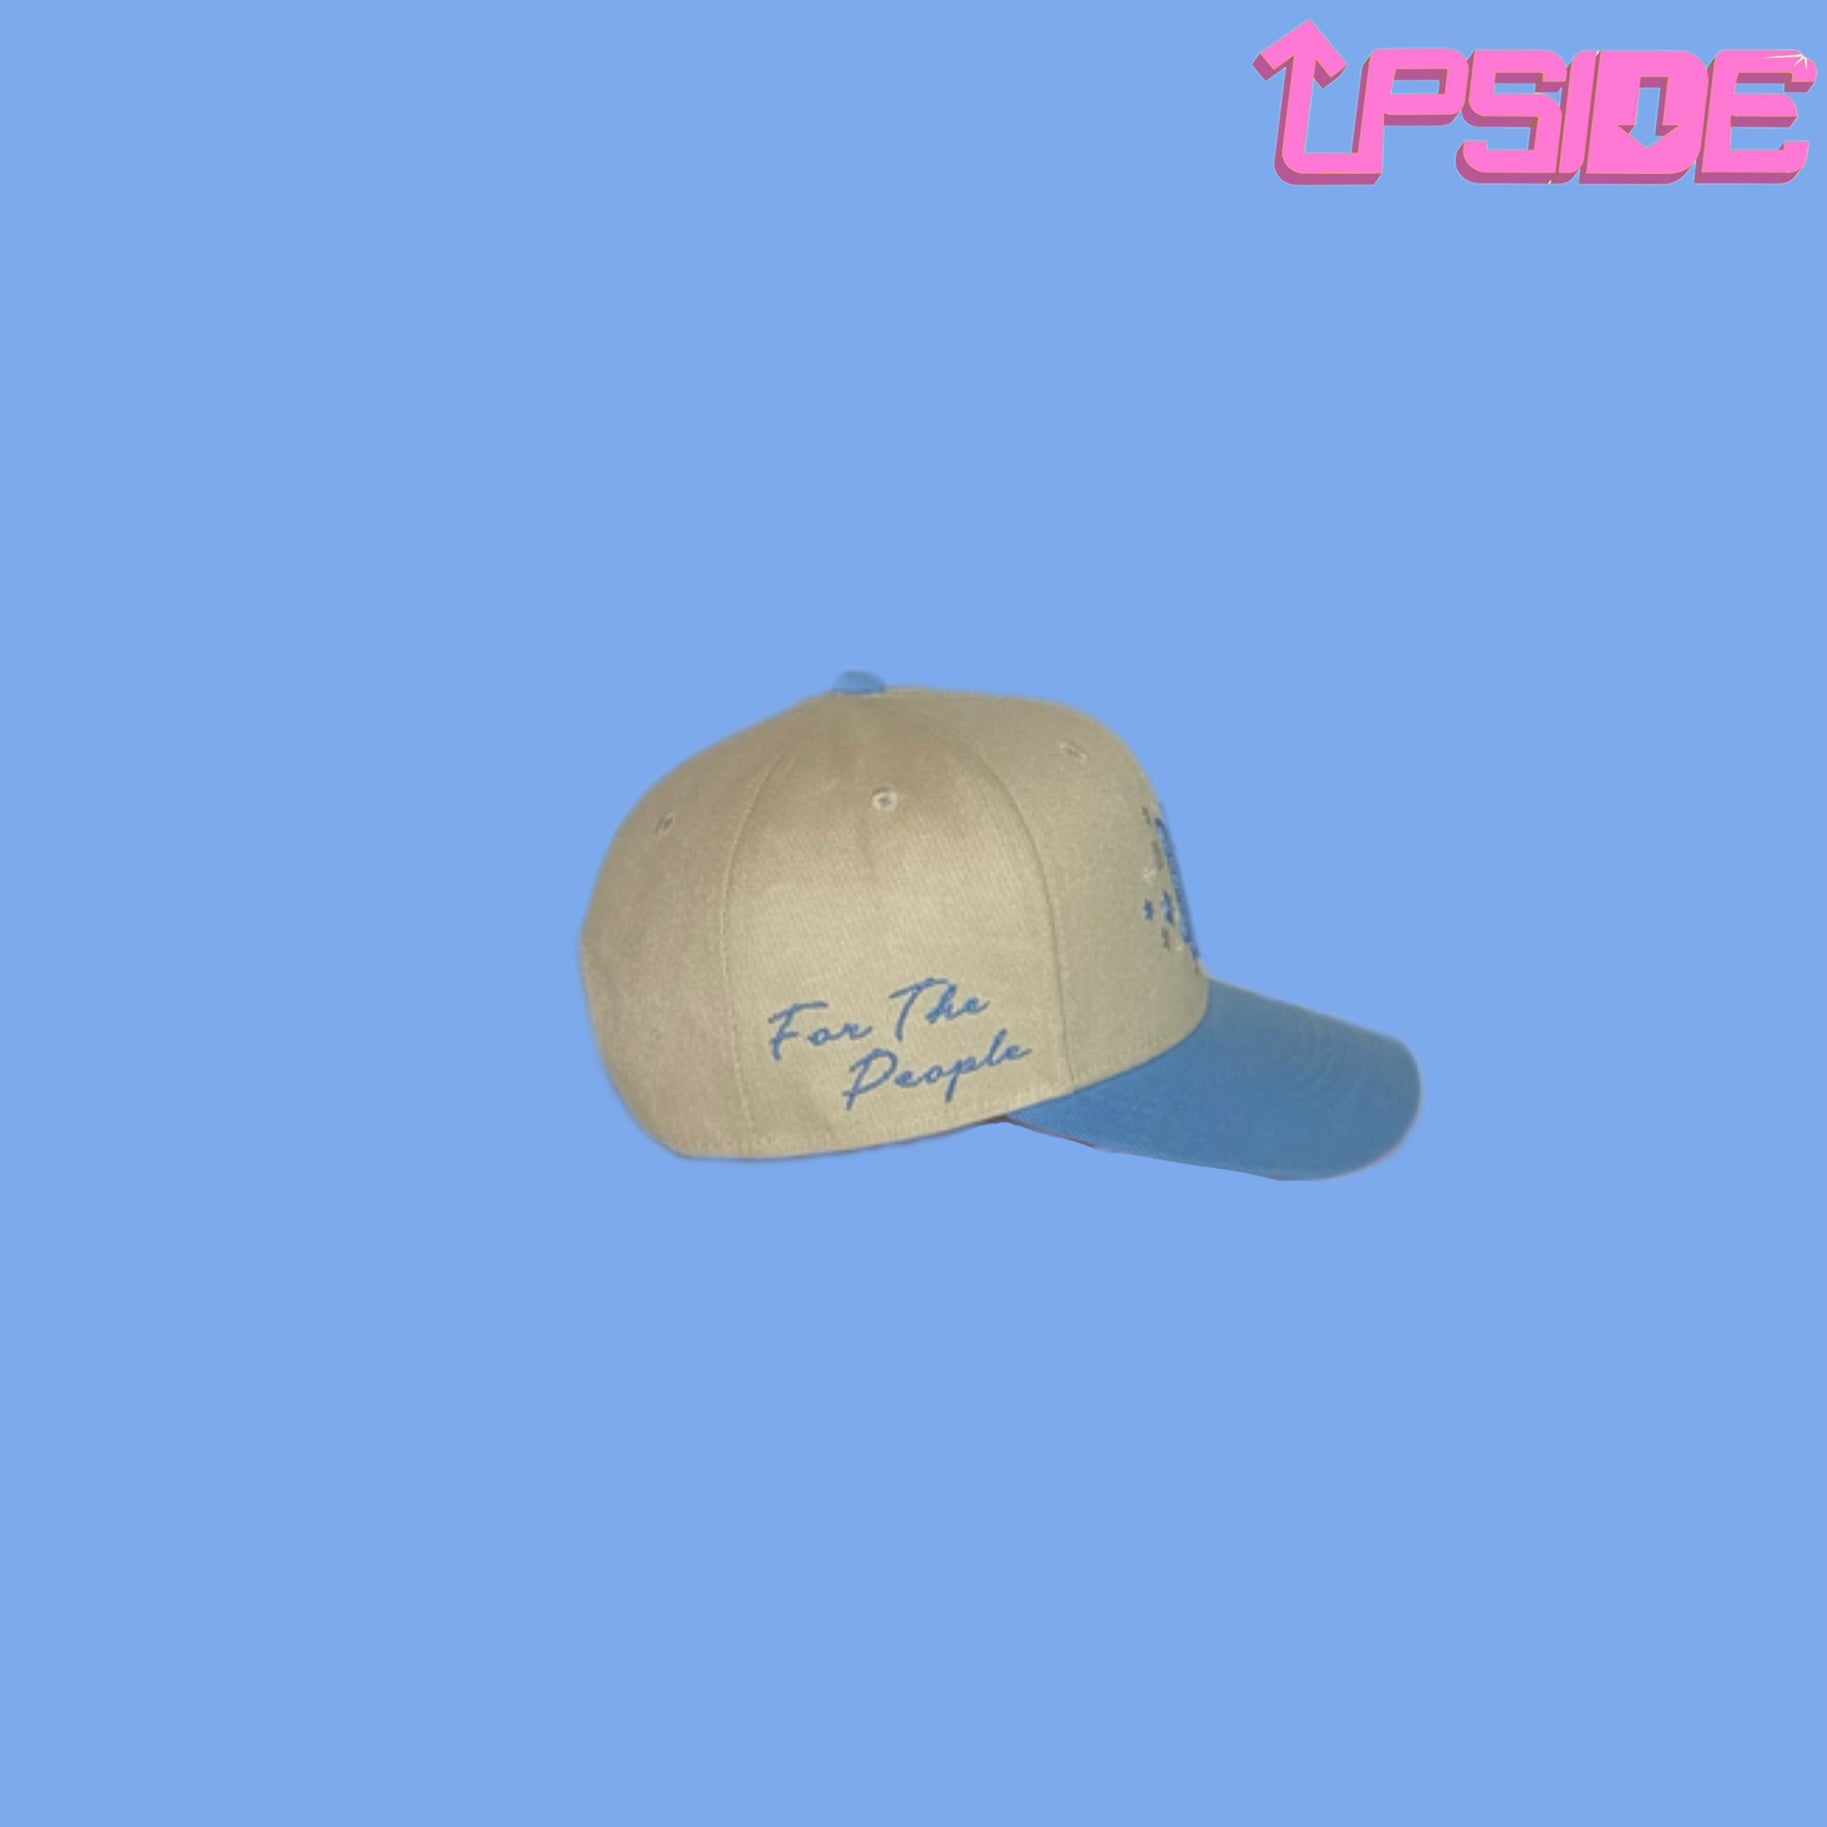 Seasonal Collection - NY Yankees Snapback (Two-Tone Cotton Candy)